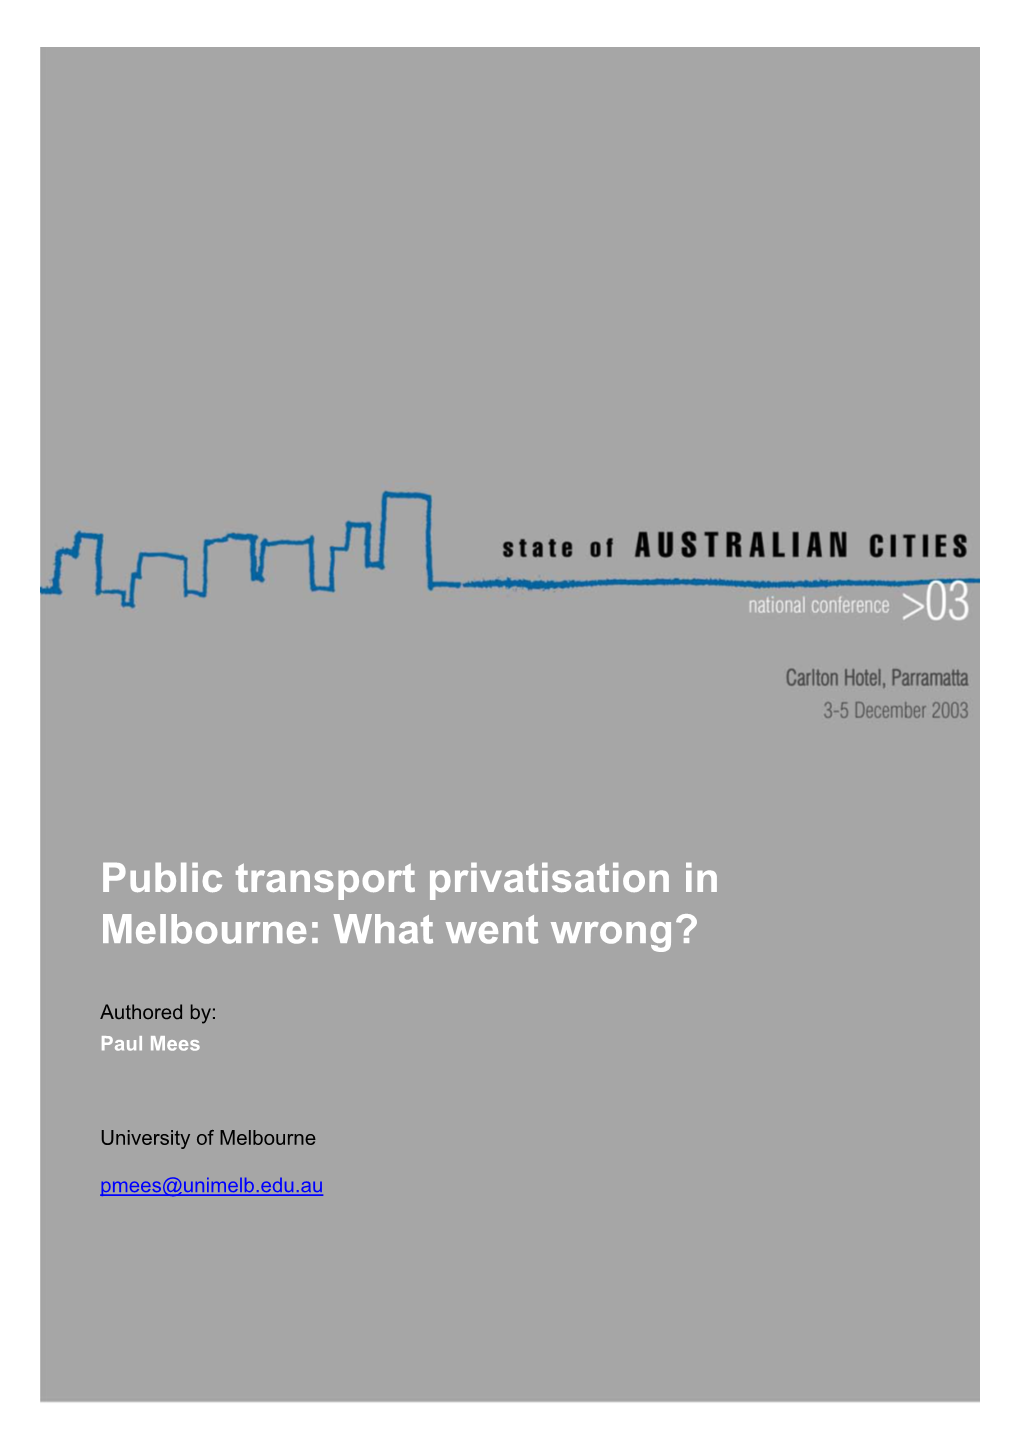 Public Transport Privatisation in Melbourne: What Went Wrong?